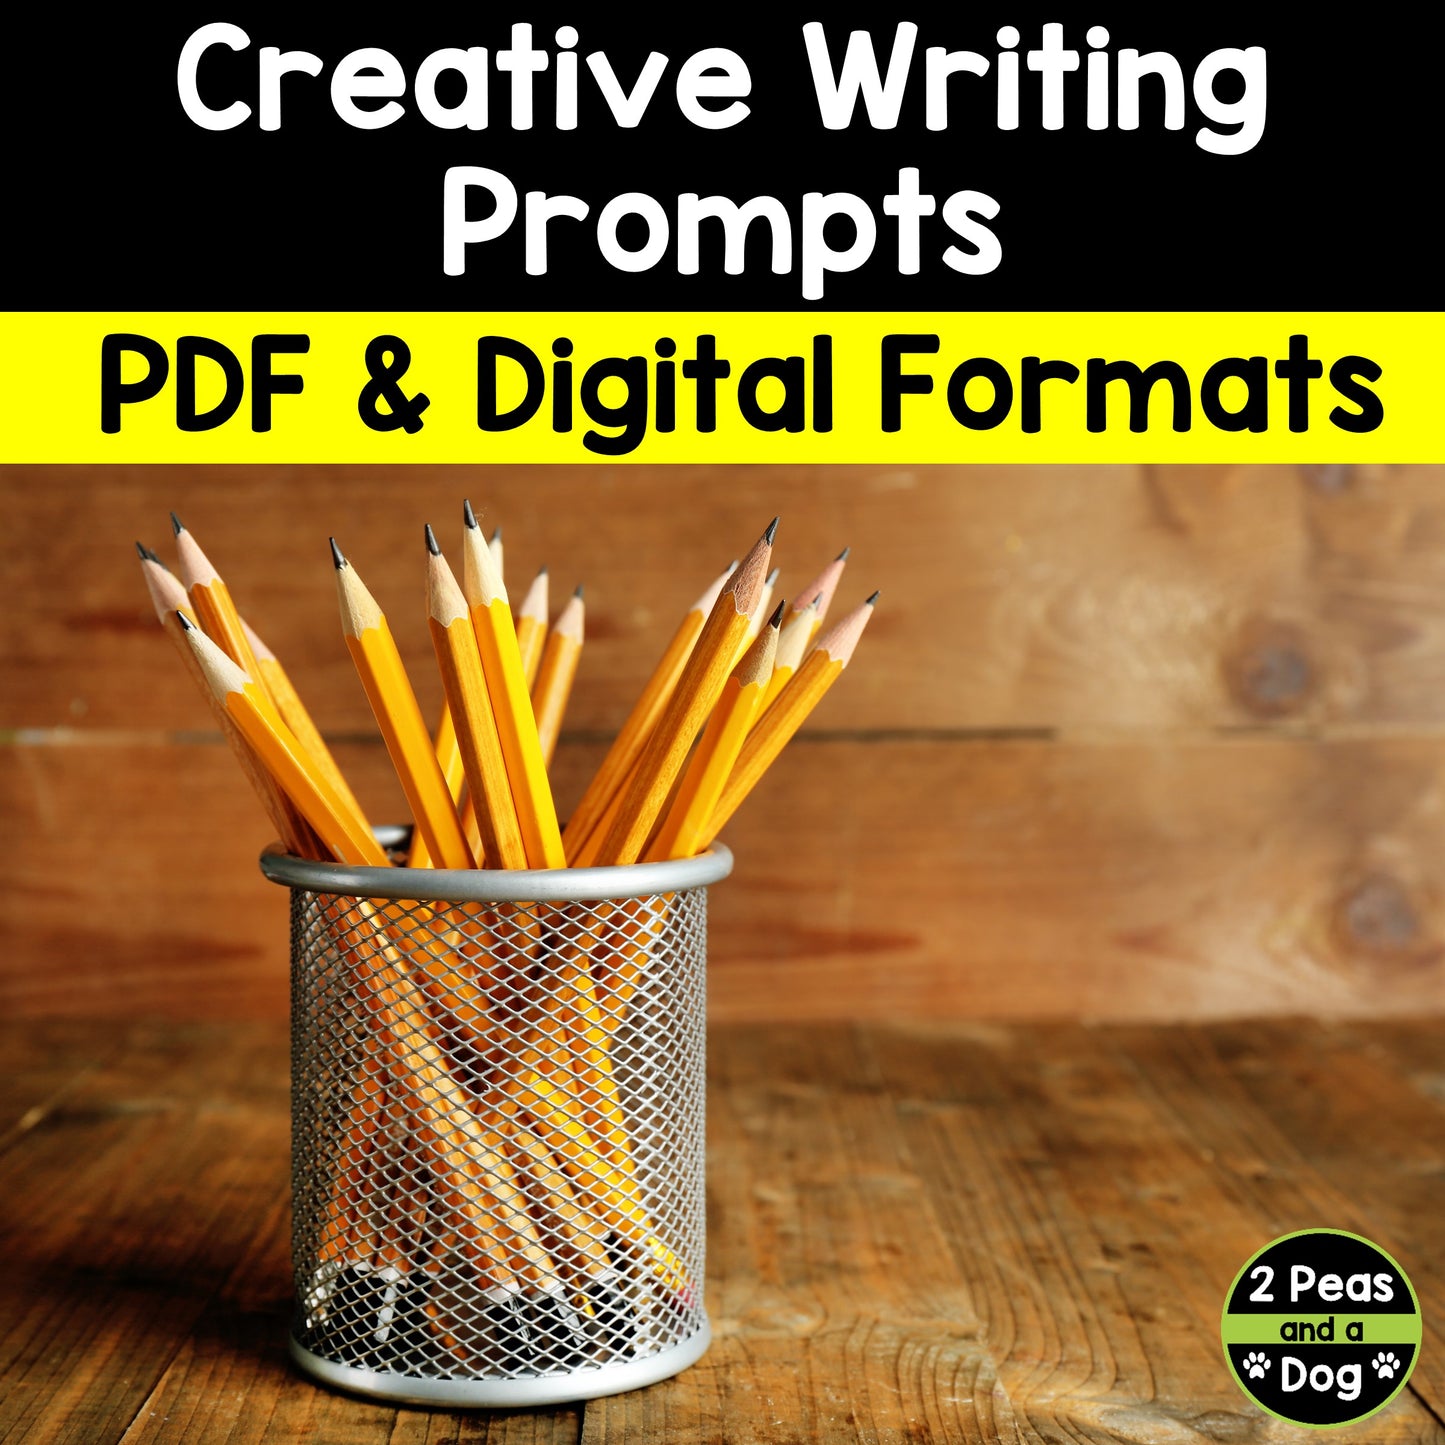 Creative Writing Prompts and Activities